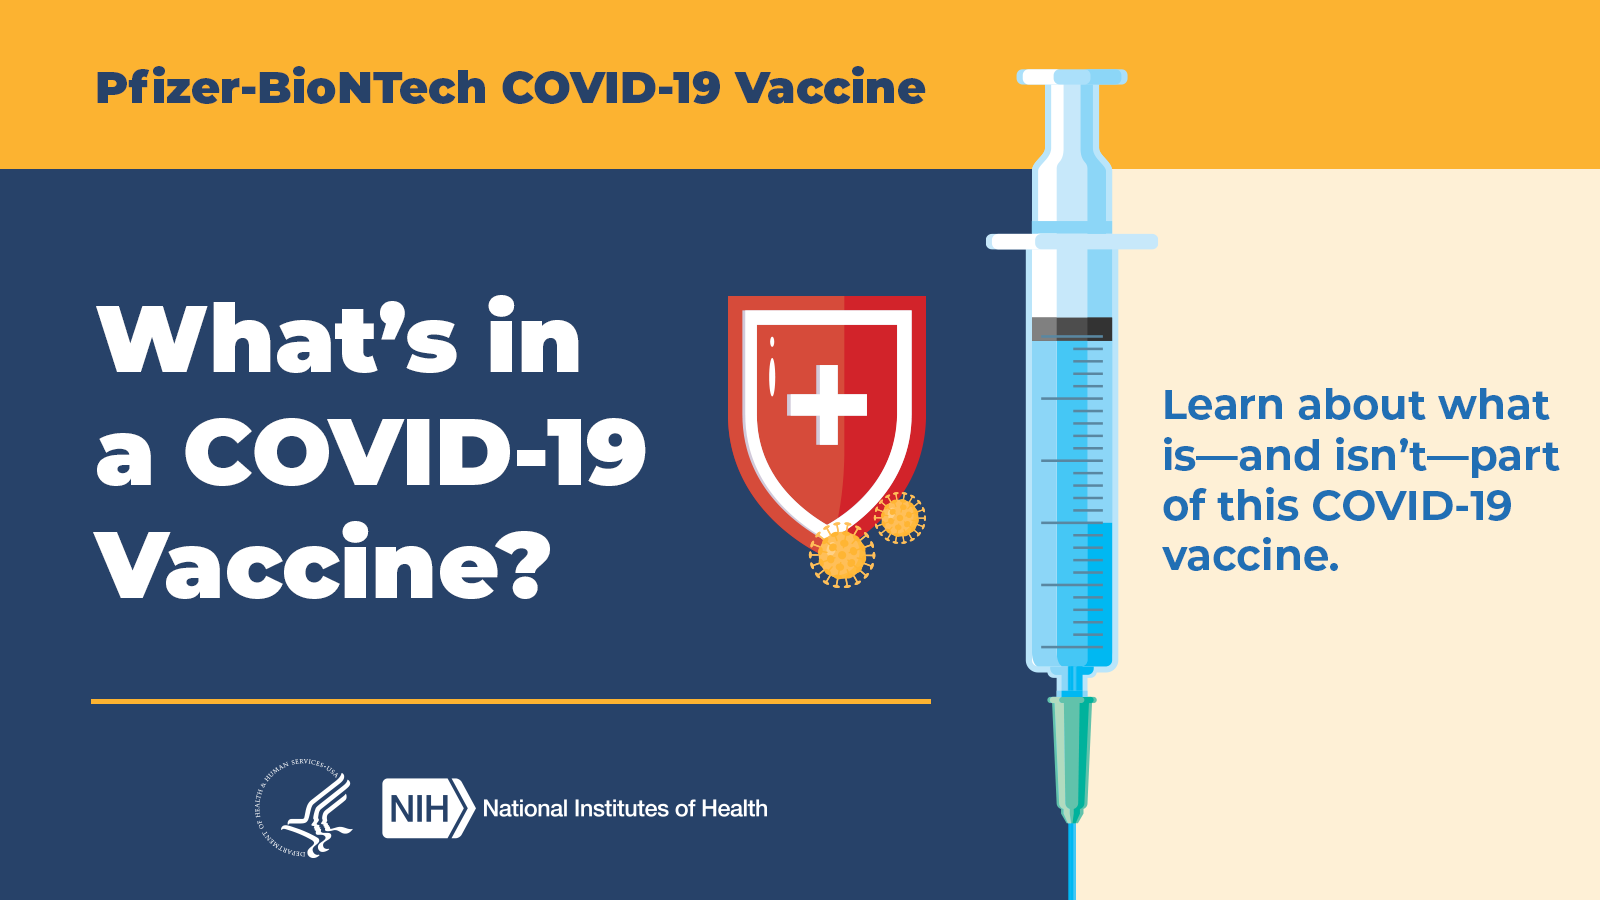 Pfizer-BioNTech COV ID-19 Vaccine  |  What's in a COVID-19 vaccine? Learn about what is - and isn't - part of this COVID-19 vaccine.